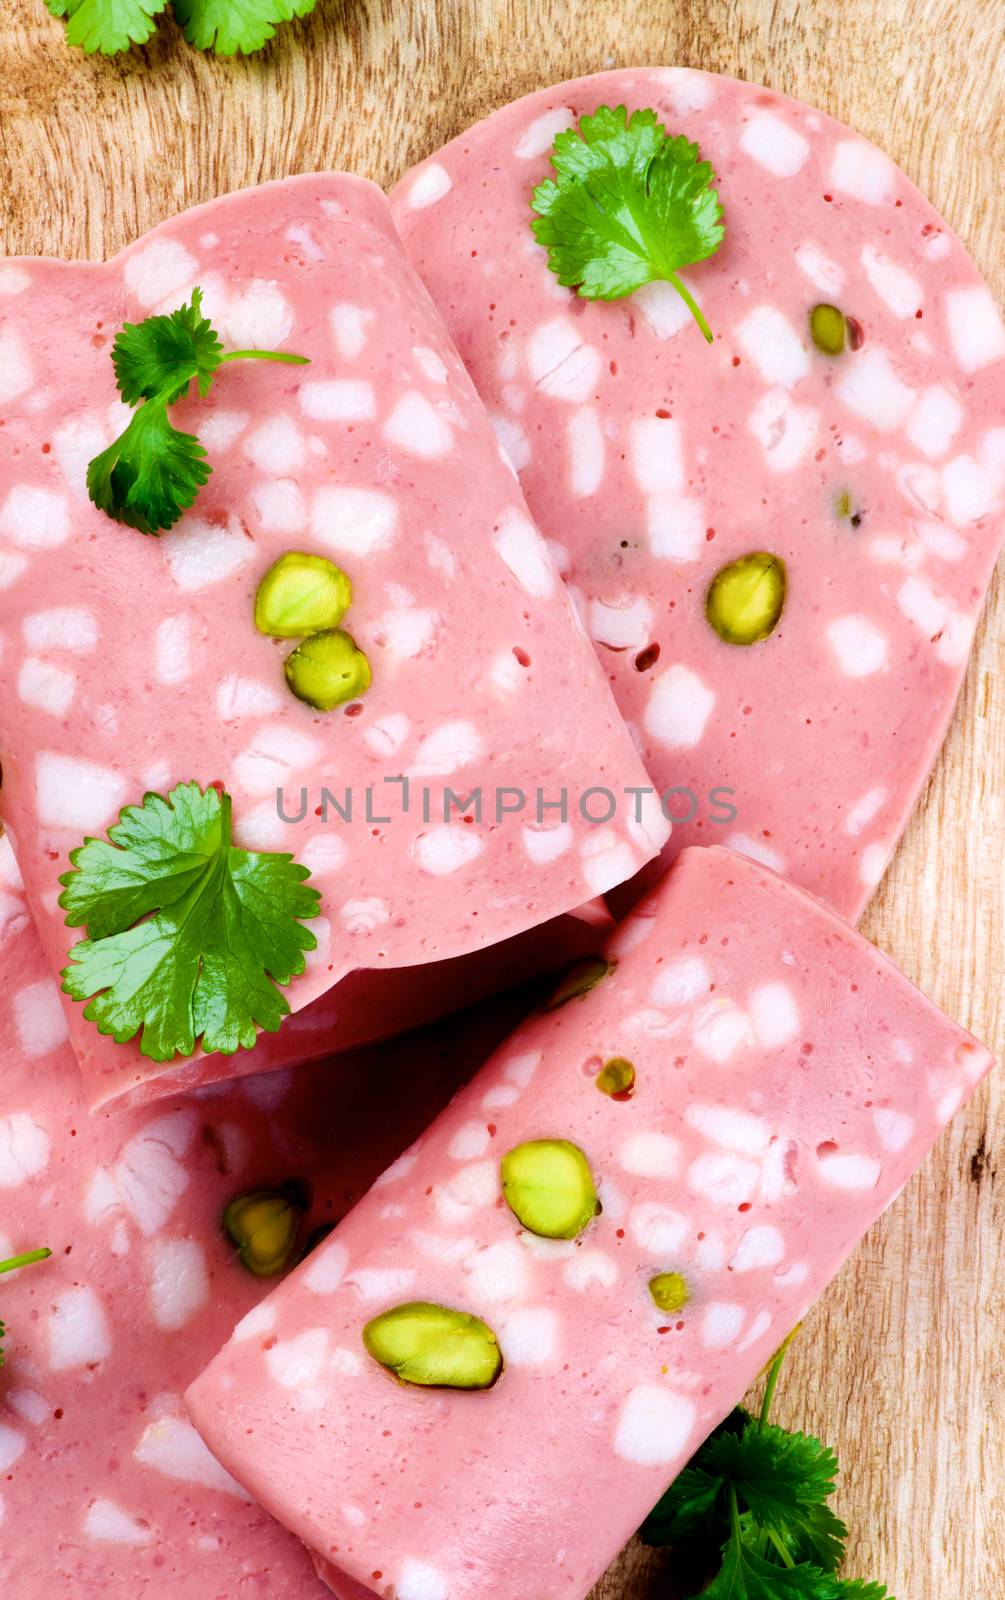 Slices of Delicious Fresh Mortadella with Pistachio and Greens closeup on Wooden background